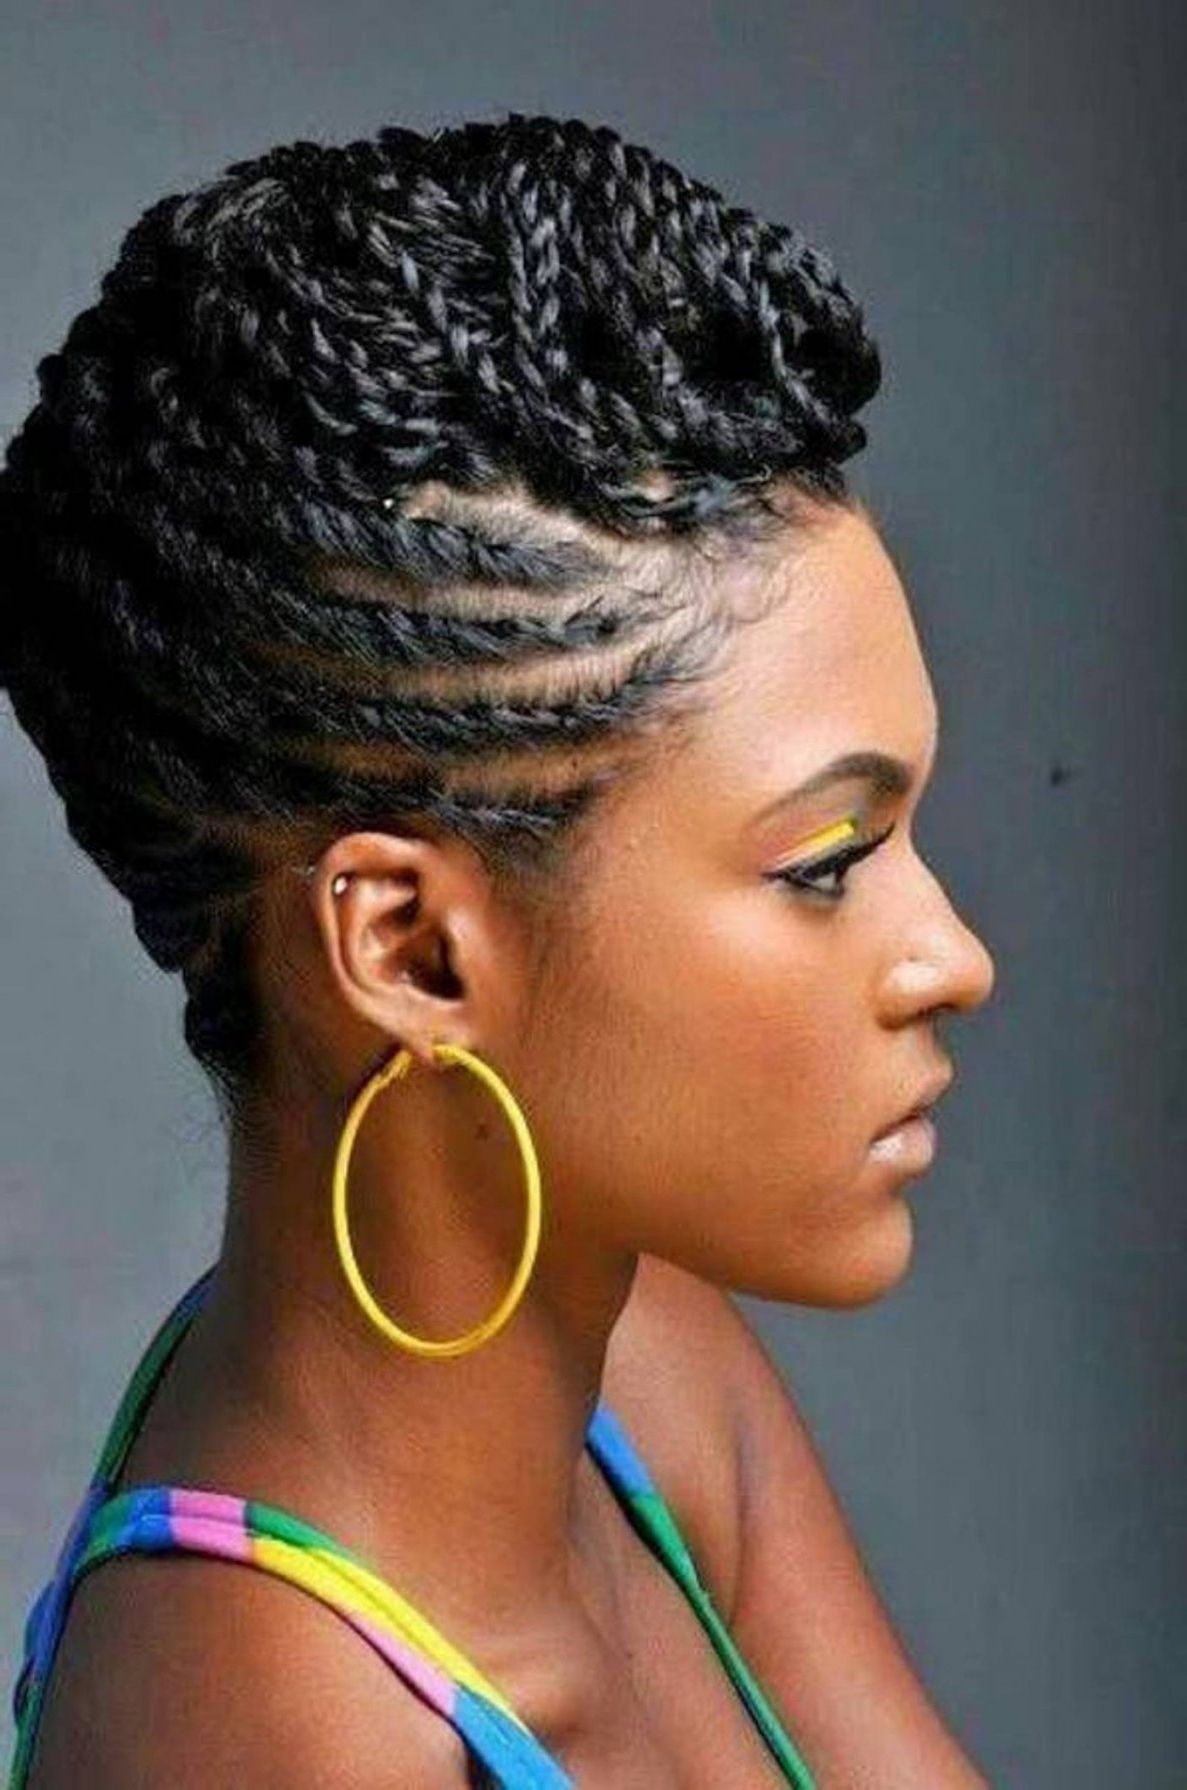 25 Updo Hairstyles For Black Women Throughout Short Braided Pertaining To Black Hair Updo Hairstyles With Bangs (View 12 of 15)